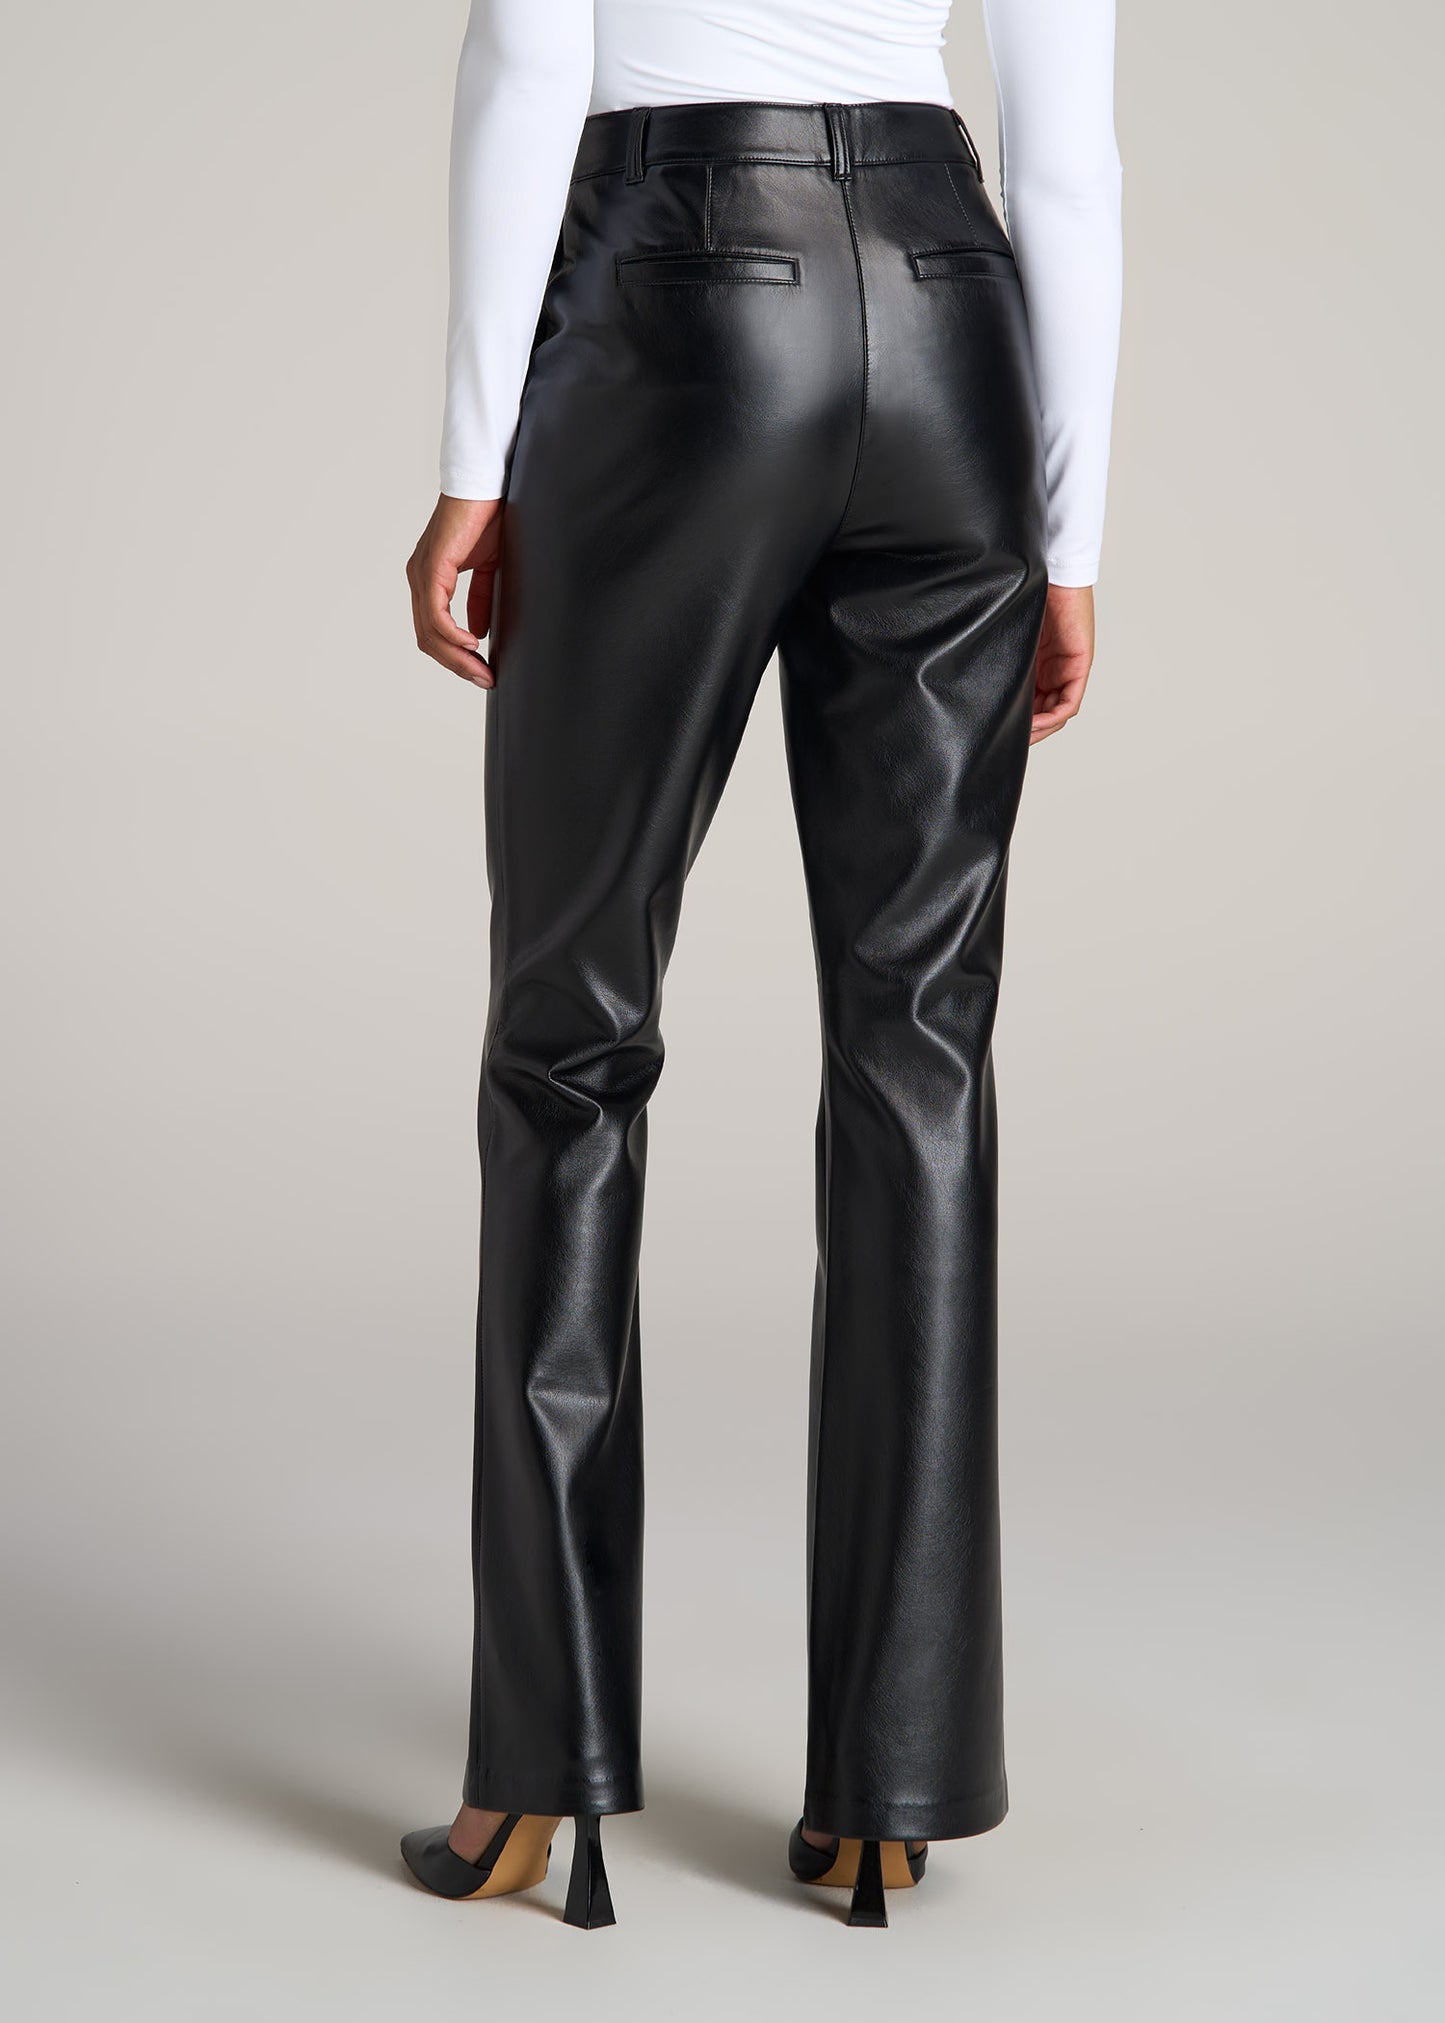 American-Tall-Women-High-Rise-Flare-Faux-Leather-Pant-Black-back